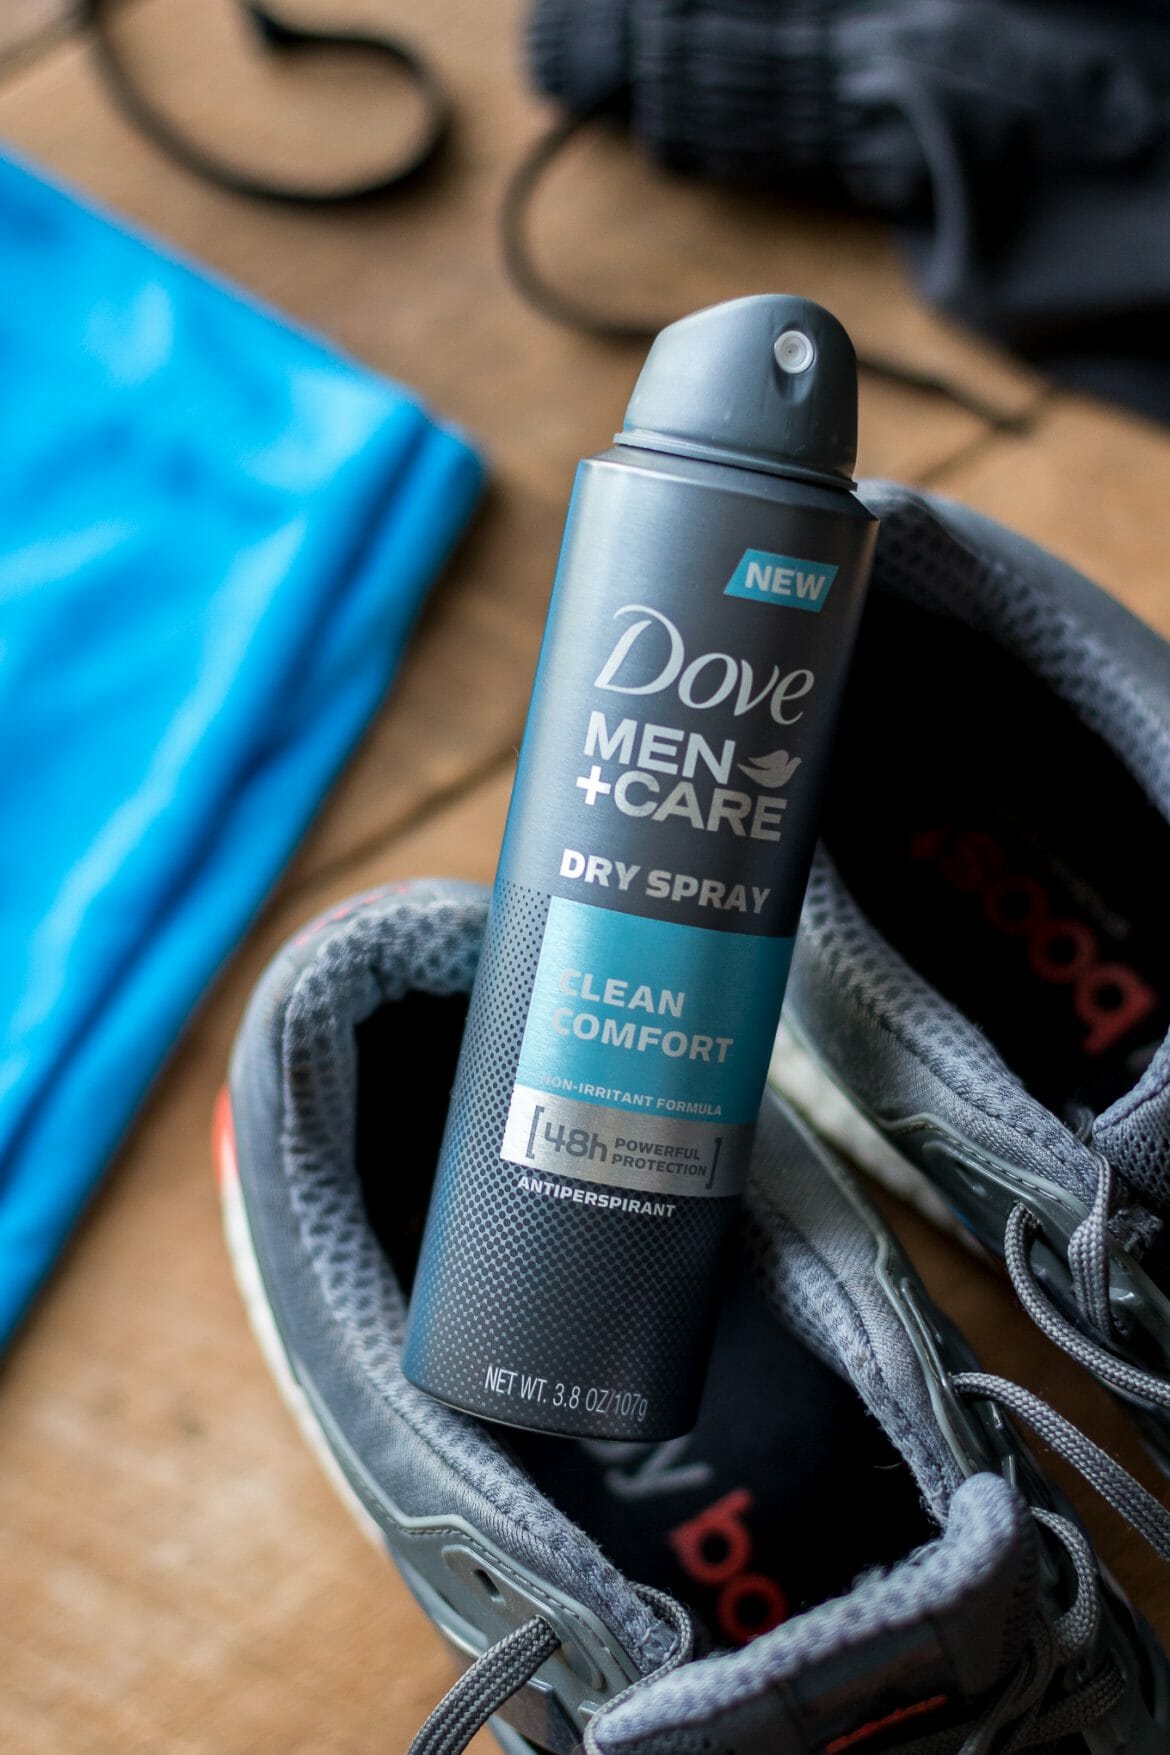 try dry, #trydry, running season, running season tips, what deodorant to wear during a run